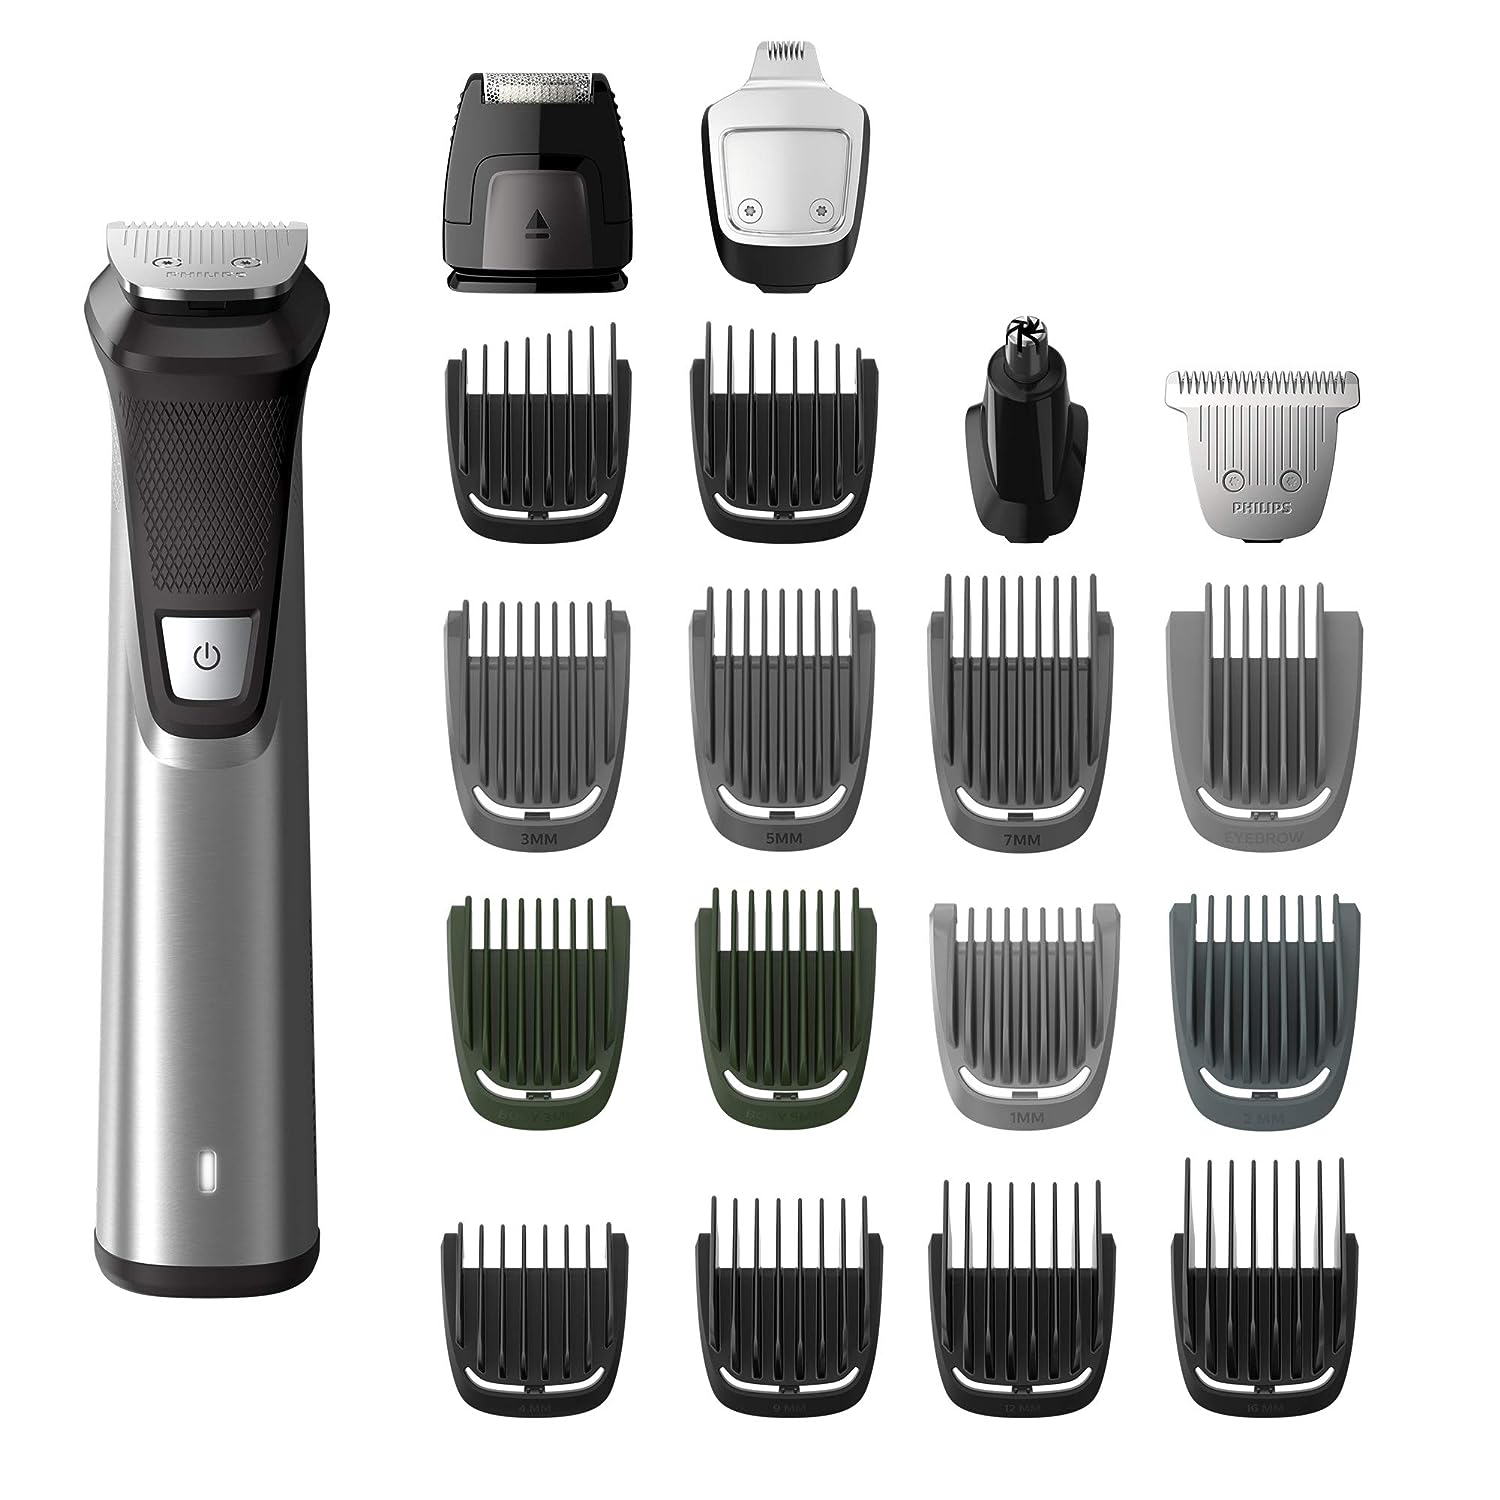  Philips Norelco Multigroomer All-in-One Trimmer Series | Christmas gift ideas for men 